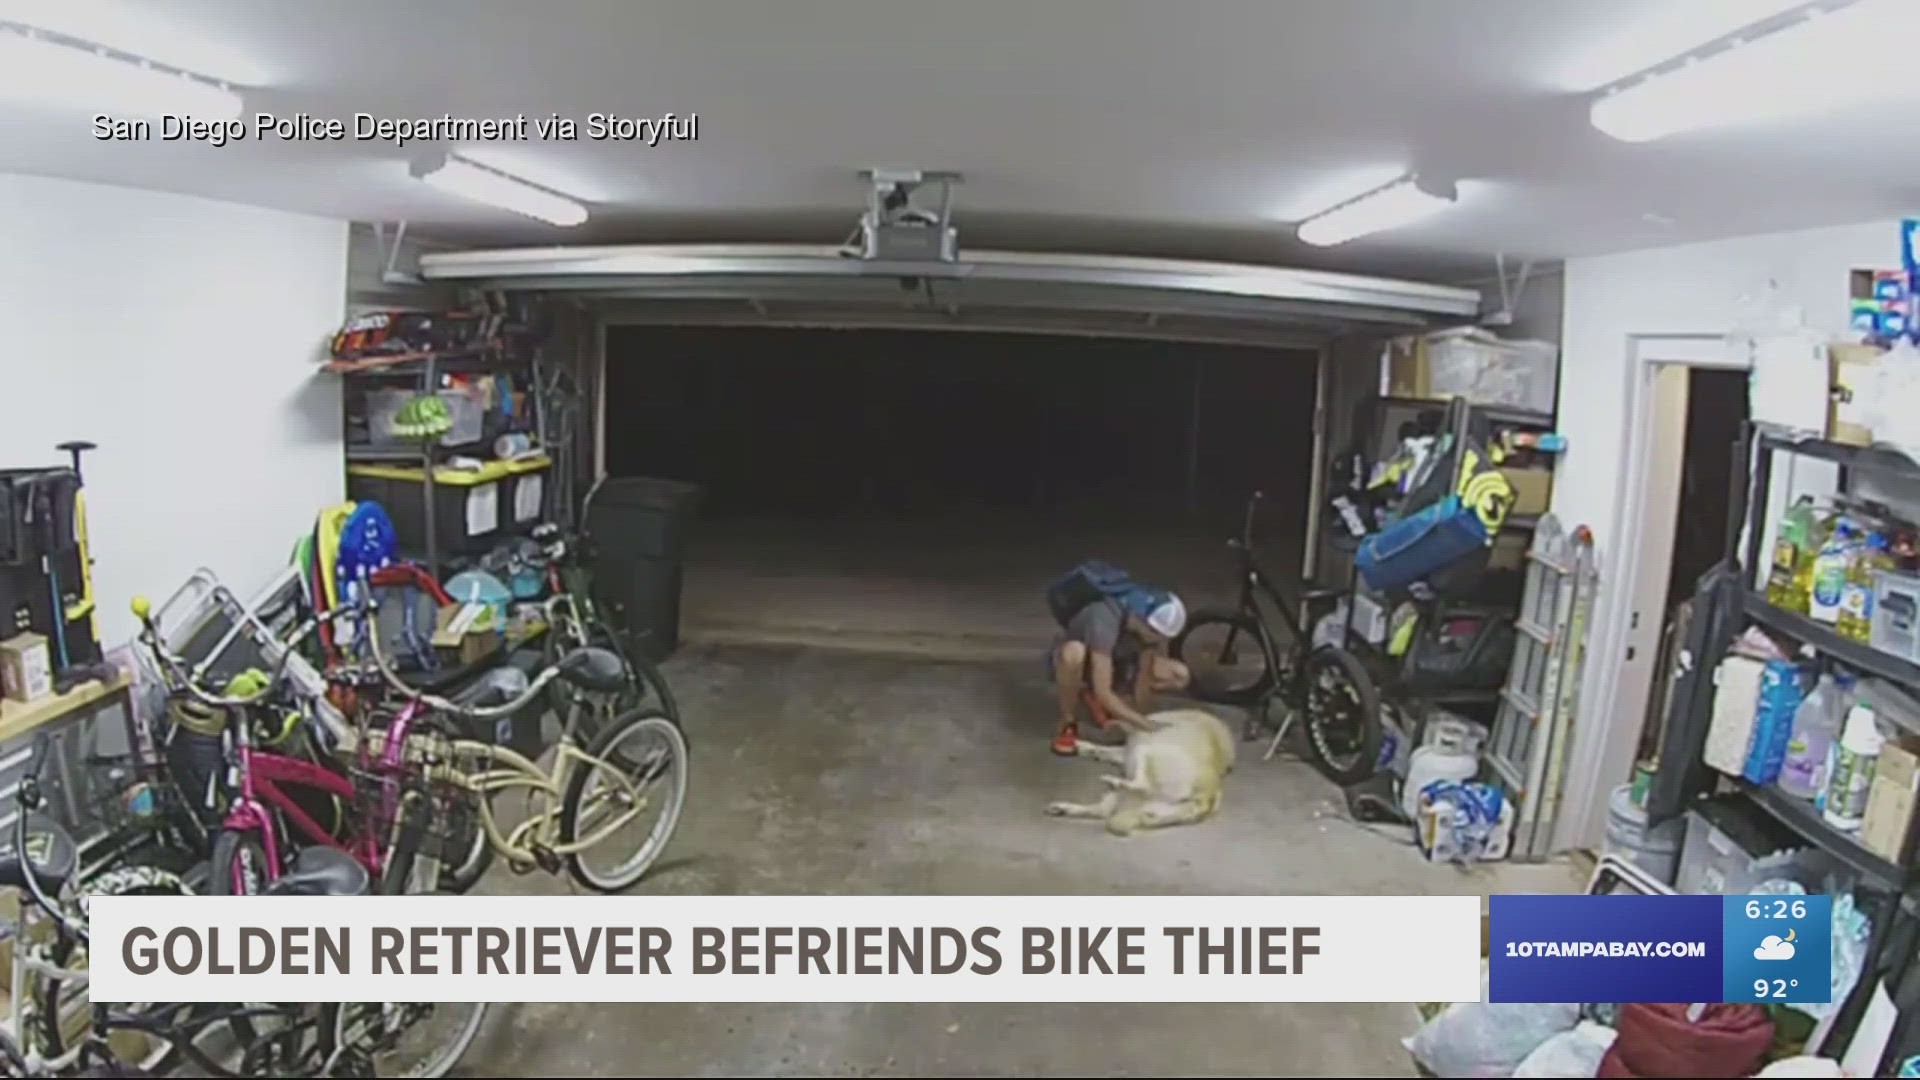 Detectives need help finding a bike thief who got away with a $1,300 bicycle.